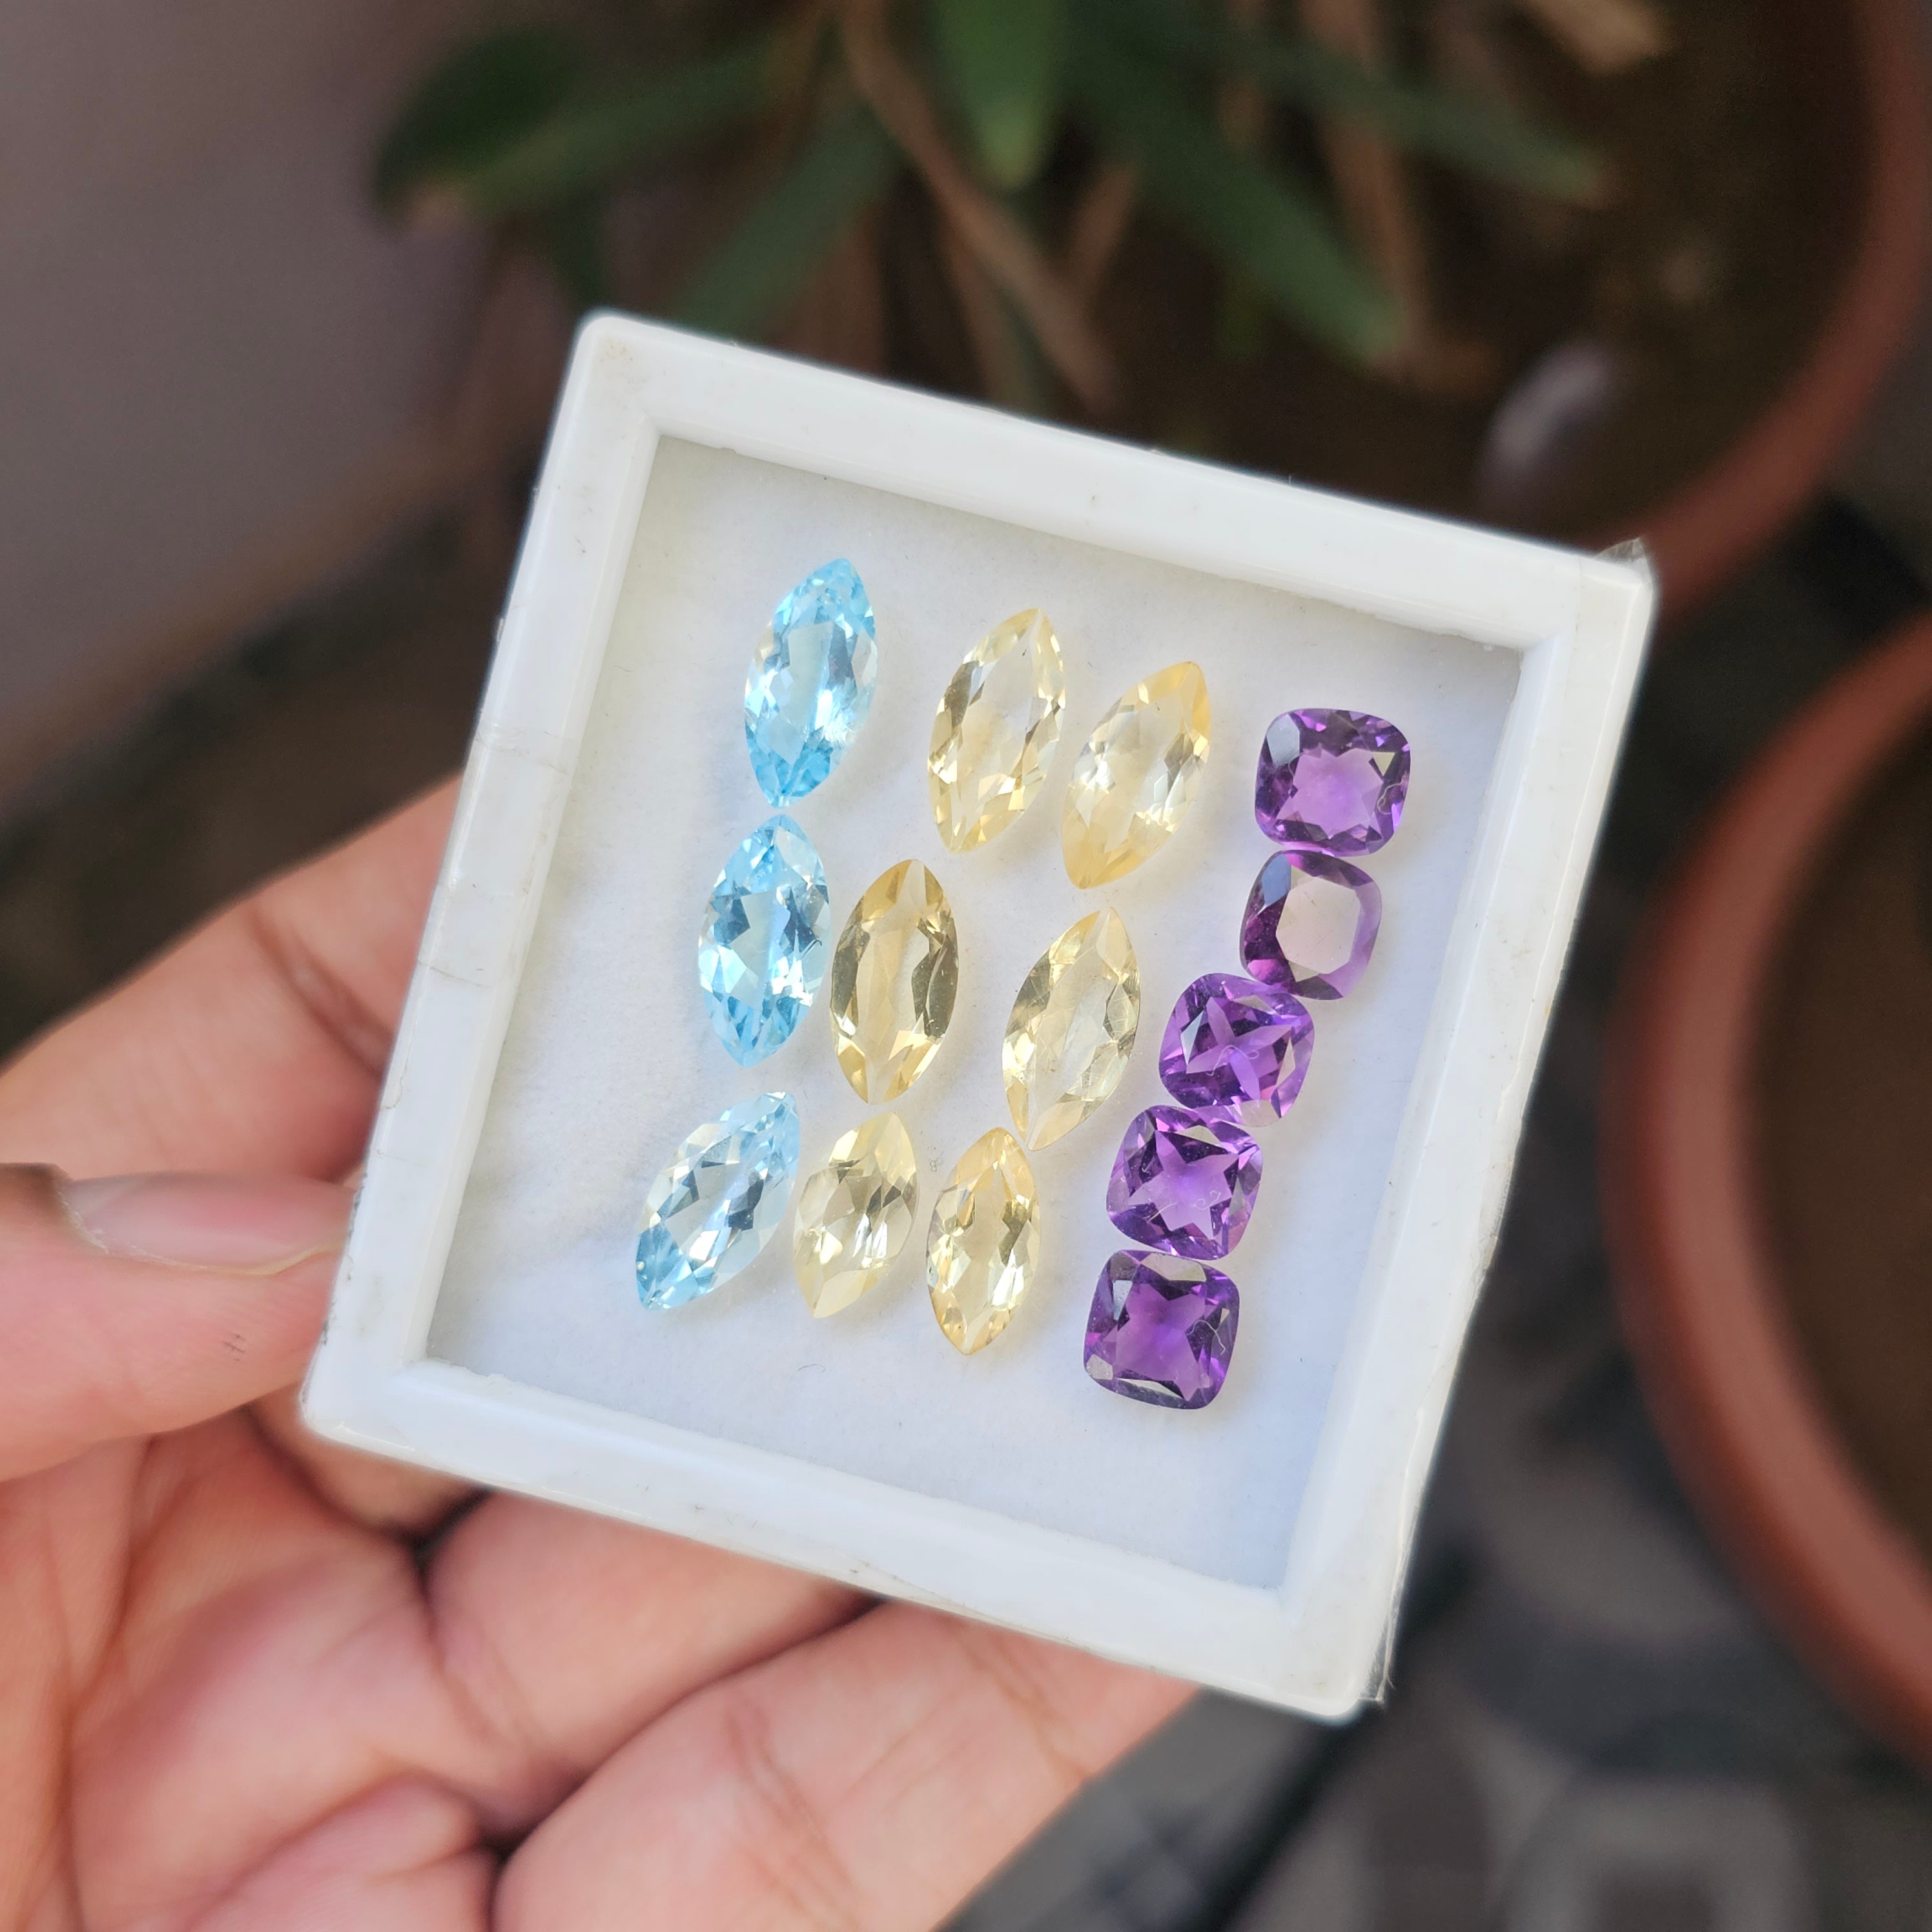 14 Pcs Natural Citrine, Amethyst & Blue Topaz Faceted Gemstone Shape: Cushion And Marquise| Size: 8-14mm - The LabradoriteKing